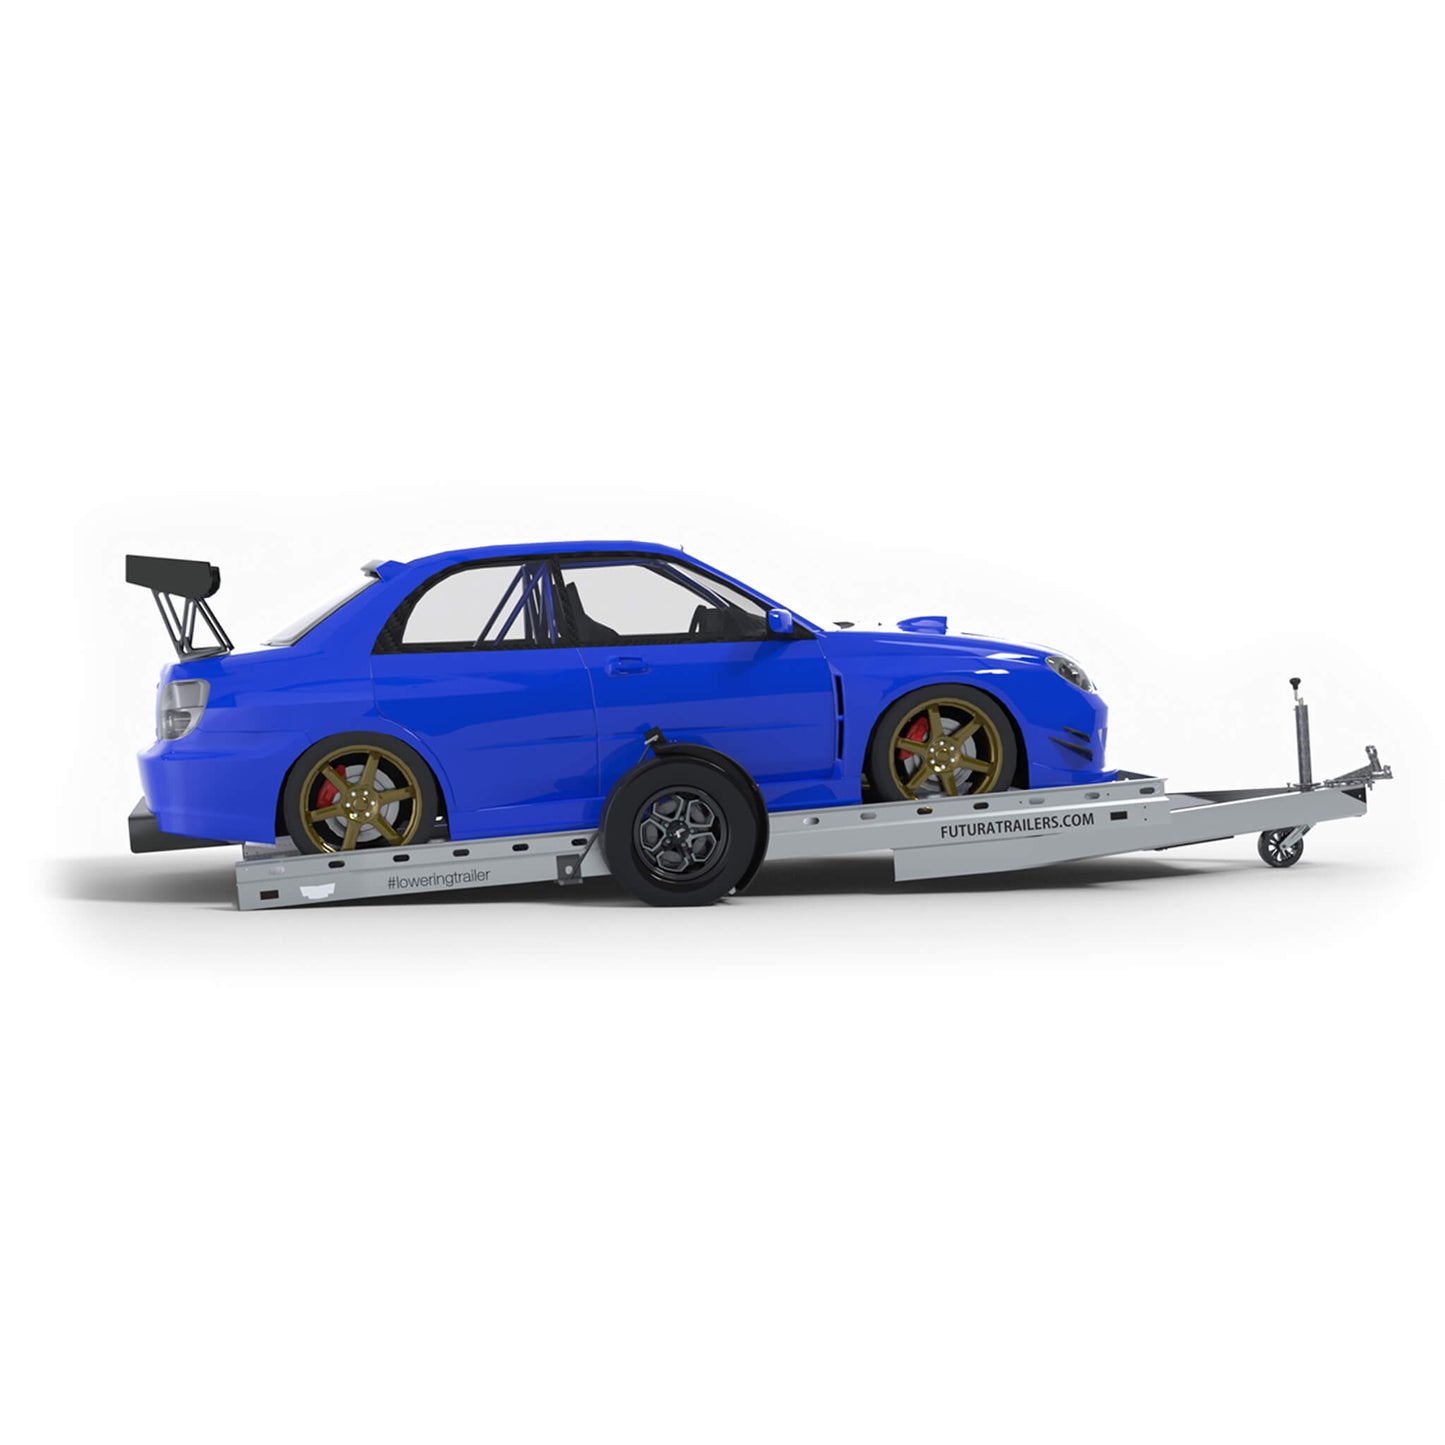 Club Sport Lowering Trailer from $13,995*